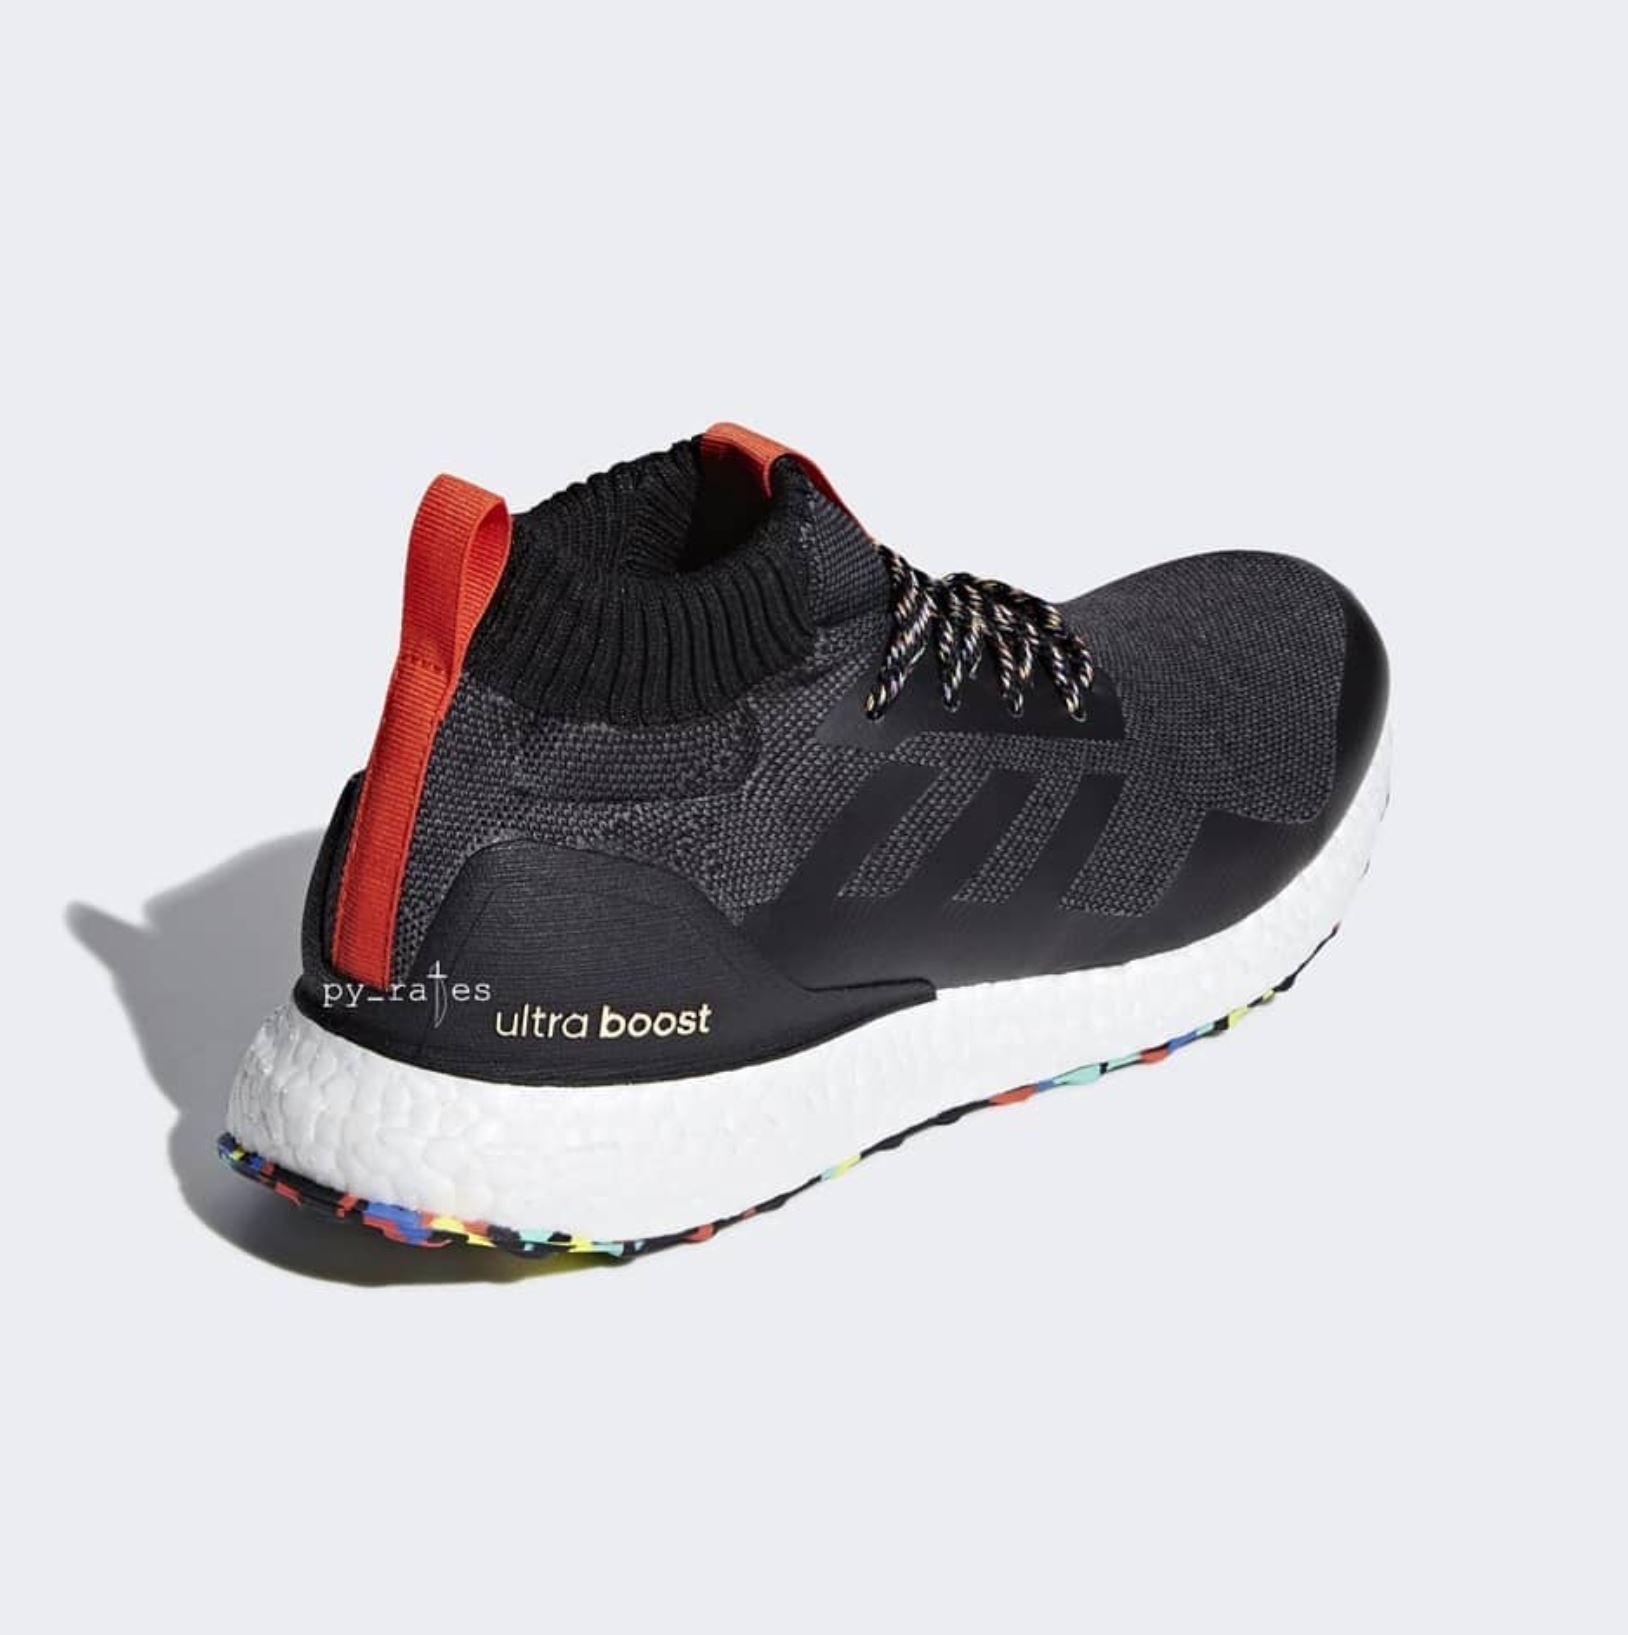 To accelerate bearing do an experiment Expect Two Multicolor adidas Ultra Boost Mids in October - WearTesters